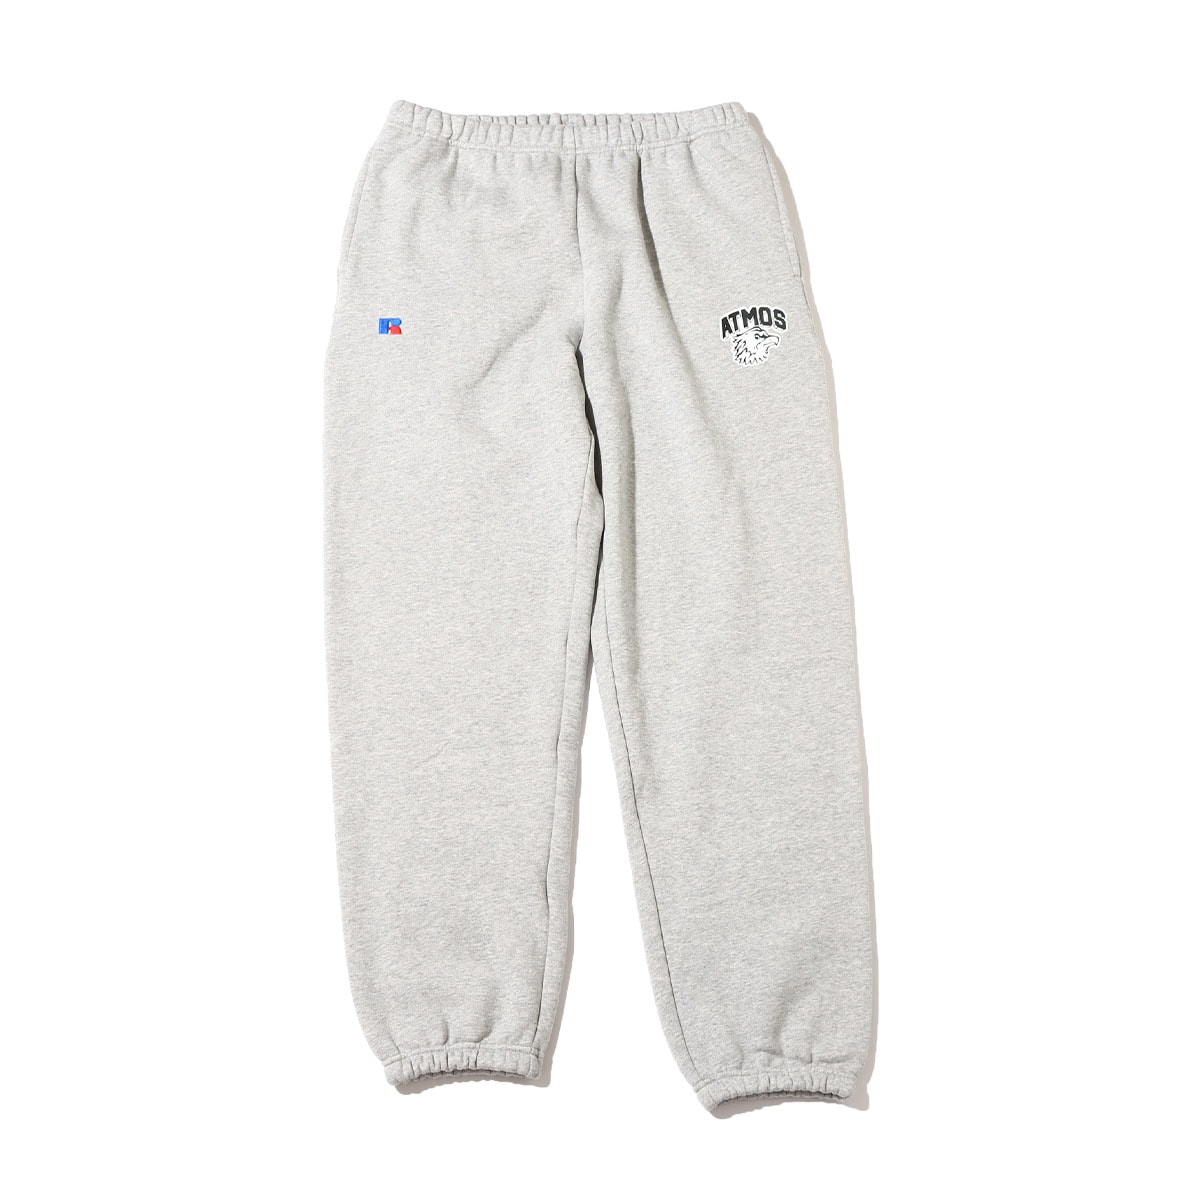 RUSSELL x atmos EAGLE LOGO SWEAT PANTS GREY 22FA-S_photo_large